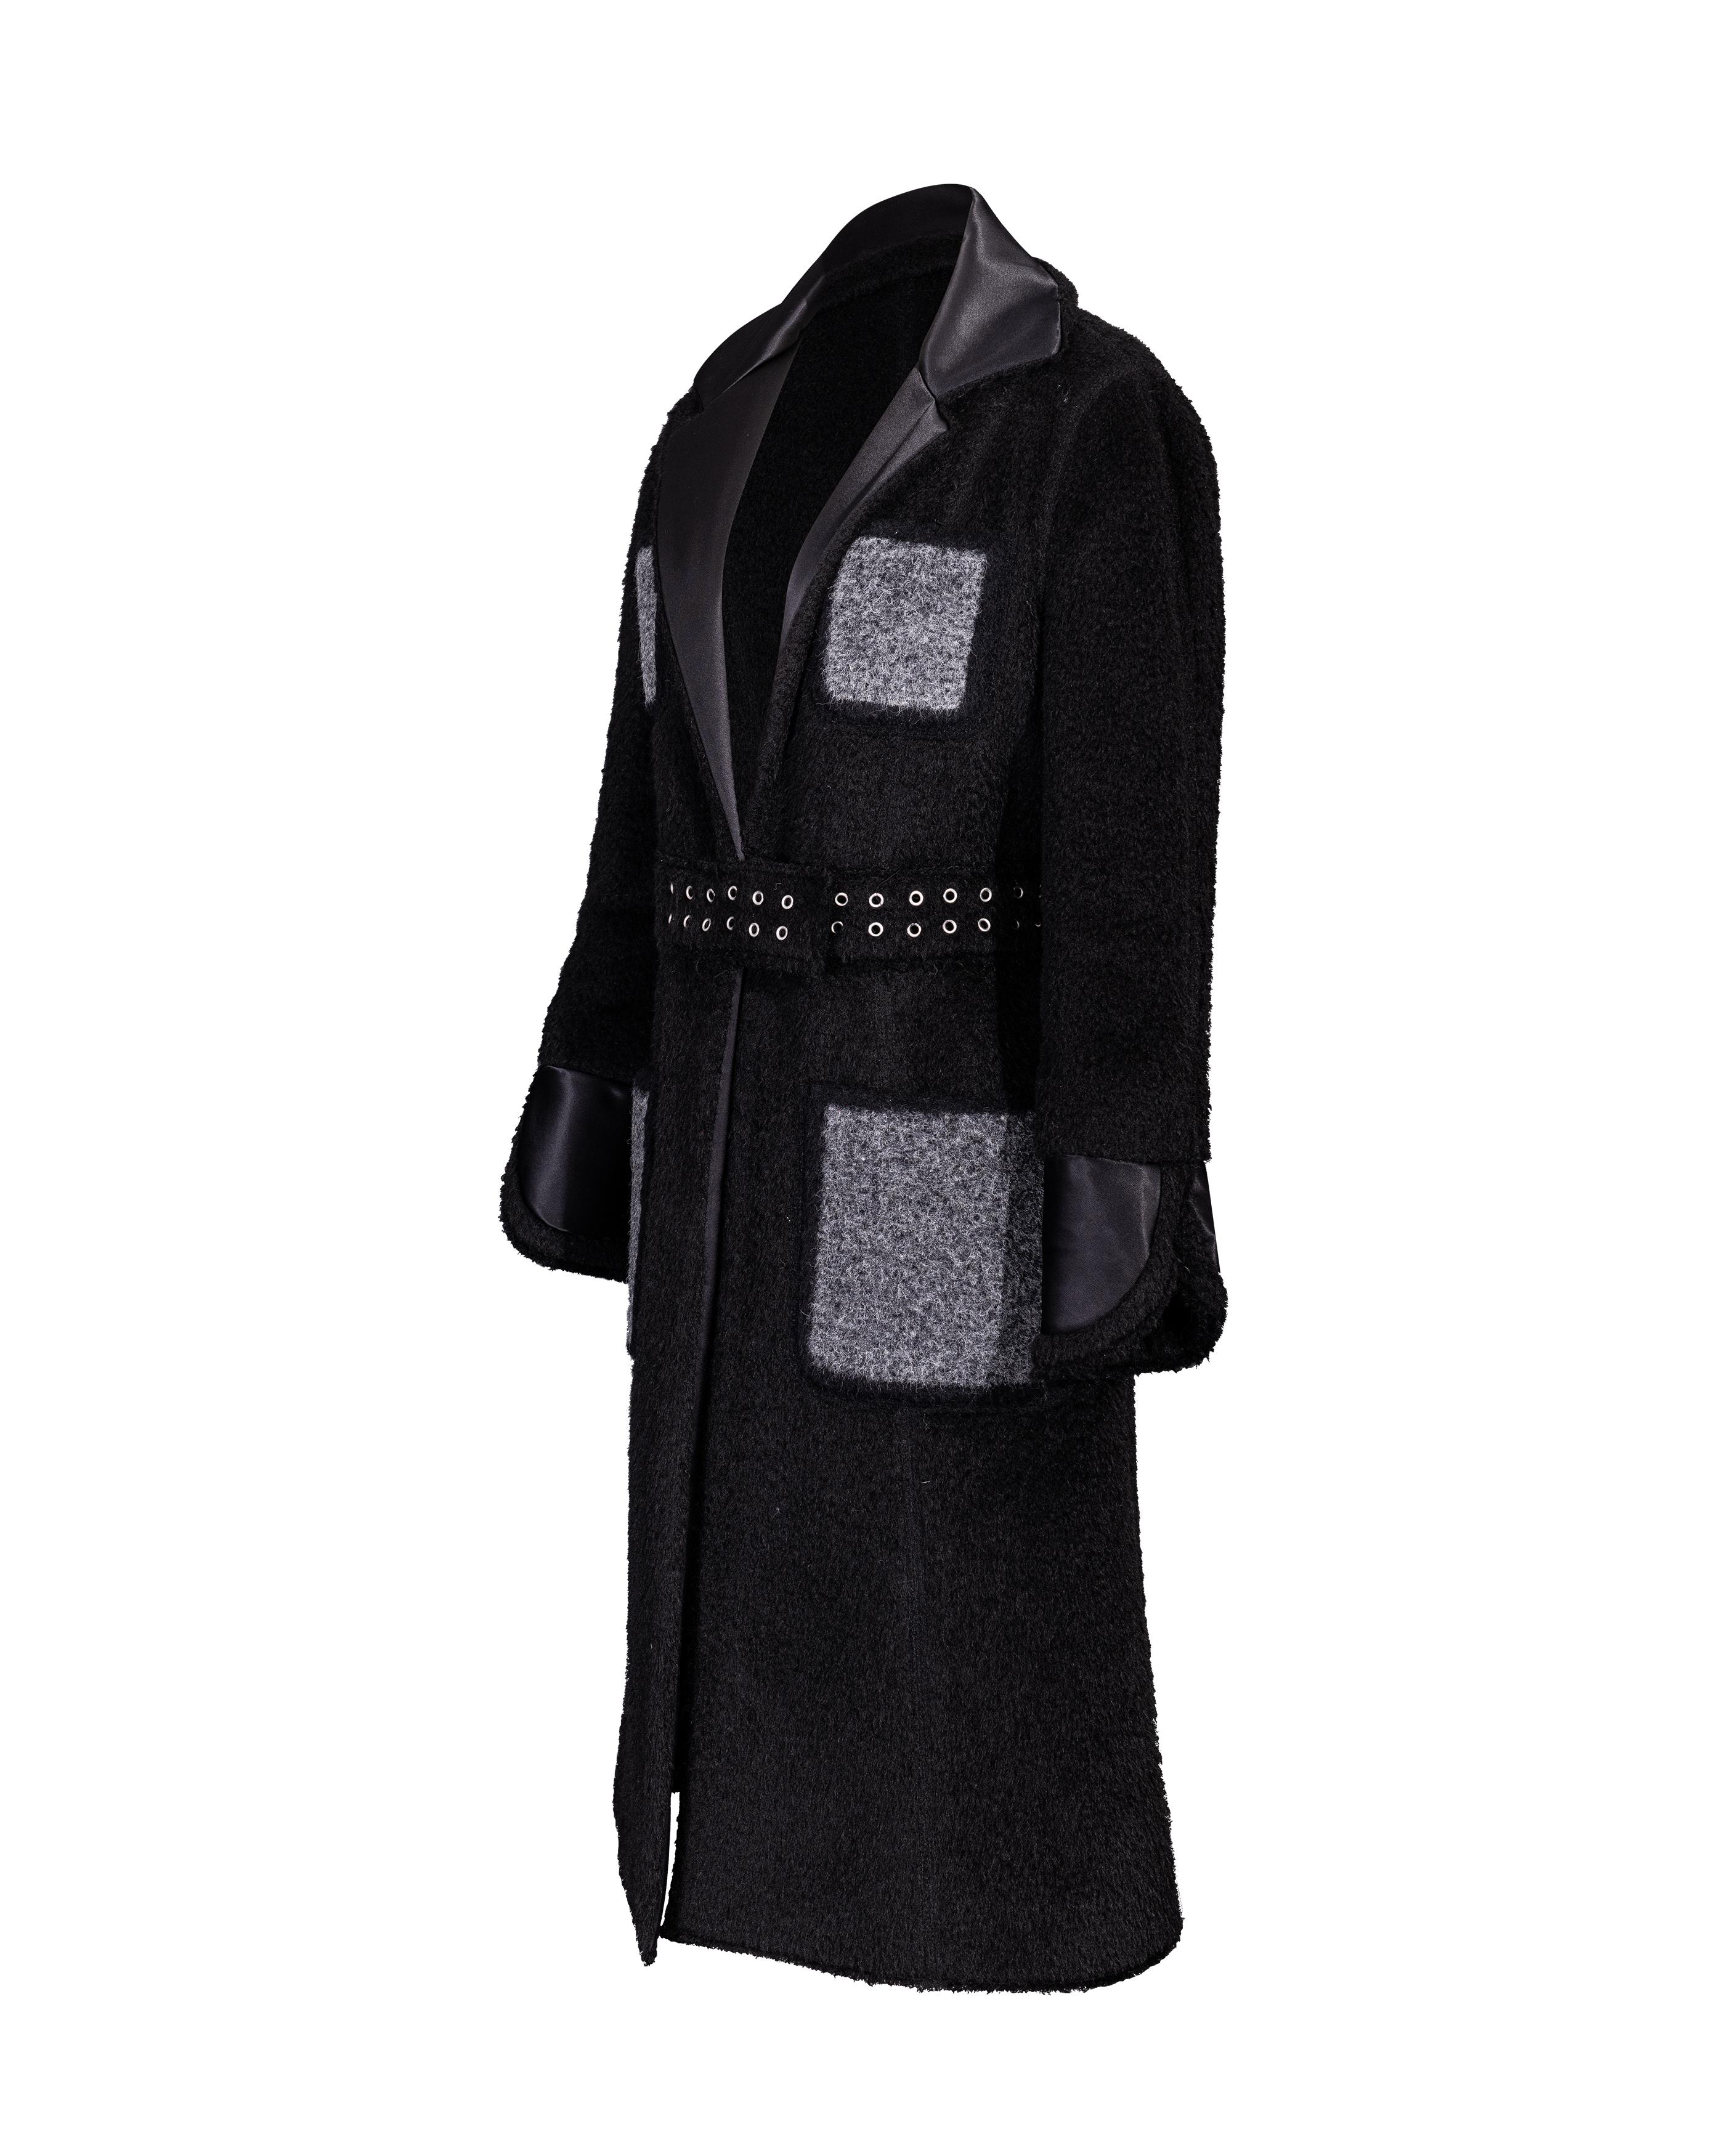 Pre-Fall 2014 Céline by Phoebe Philo black shearling coat with silk lapels and gray contrast pockets. Features built-in silver-tone grommet waist-belt with silver center buckle and snap closure. Silk contrast lapels and wrist details. Gray contrast